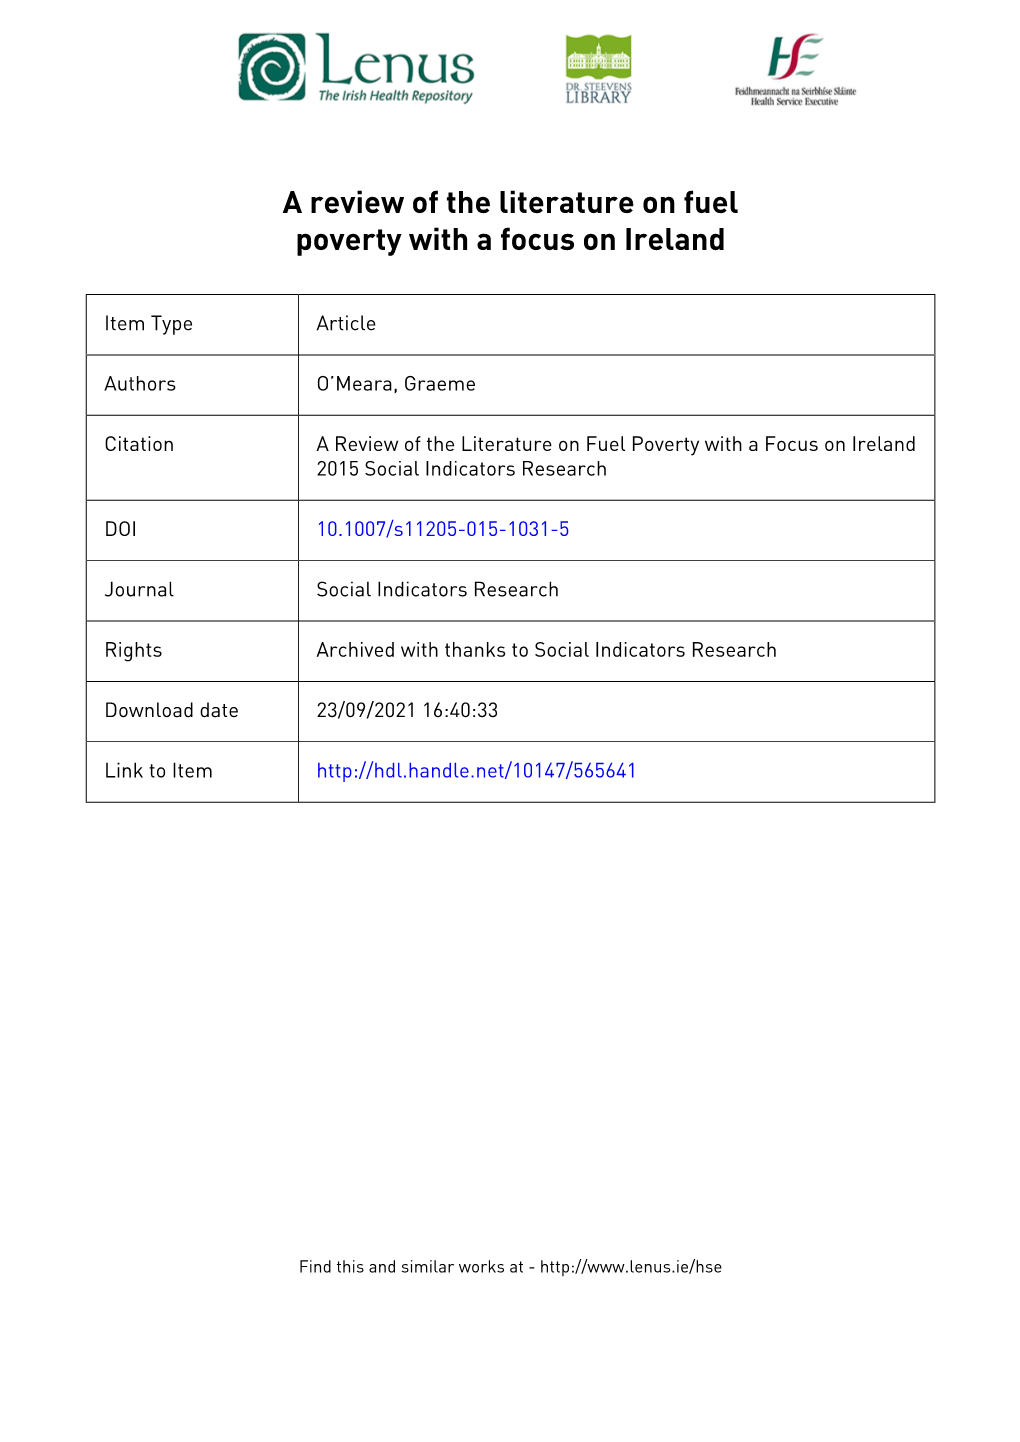 A Review of the Literature on Fuel Poverty with a Focus on Ireland